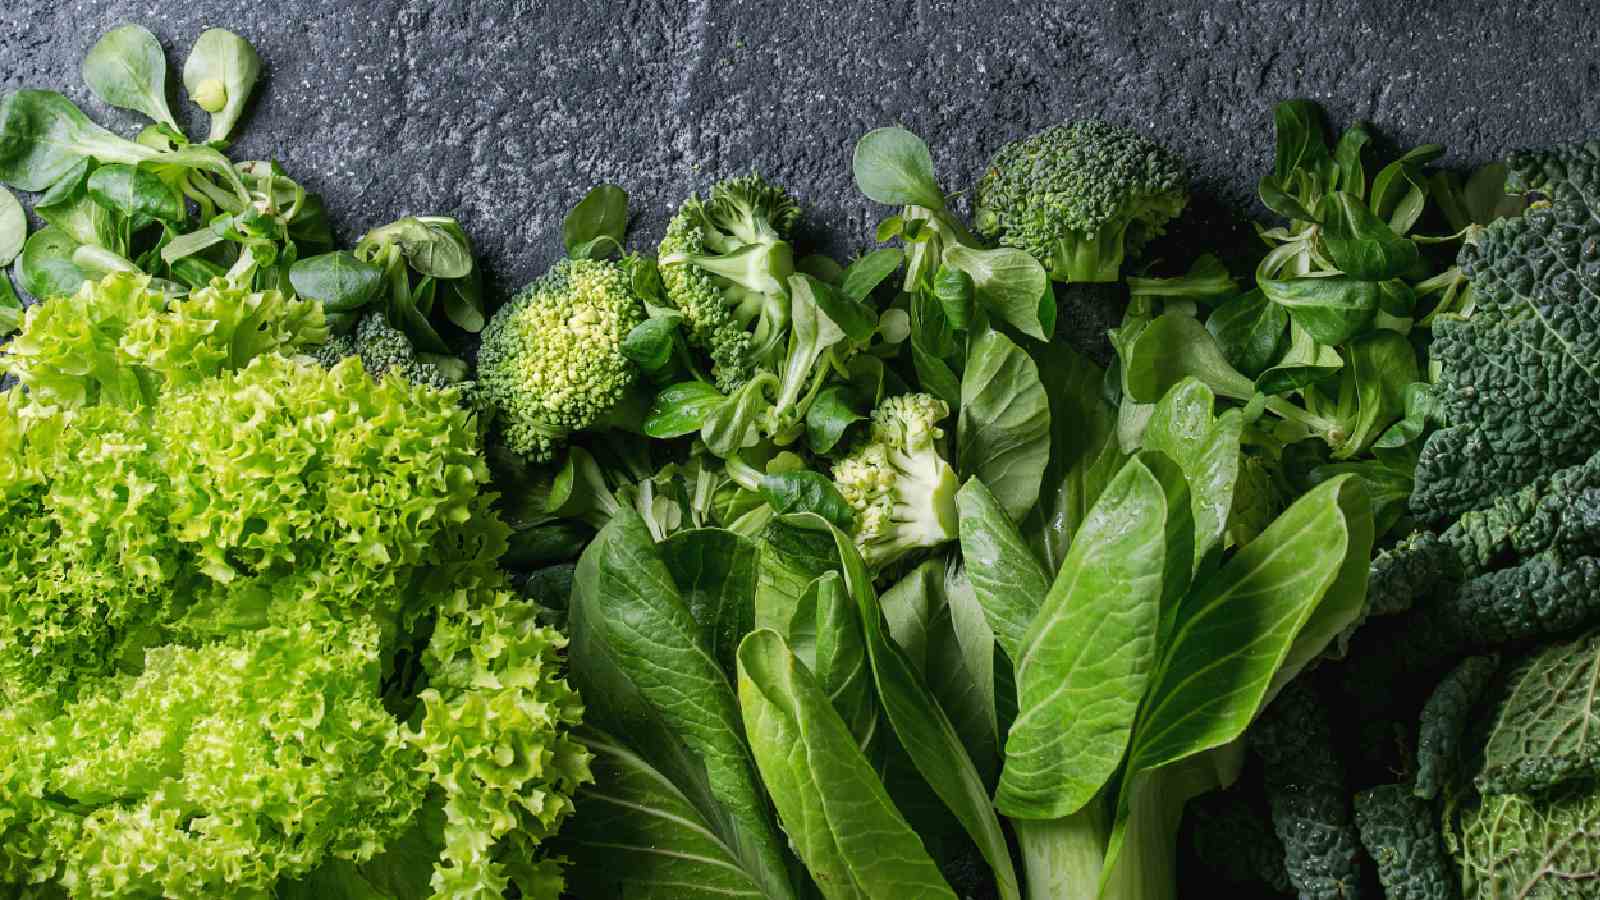 4 green vegetable recipes you can try